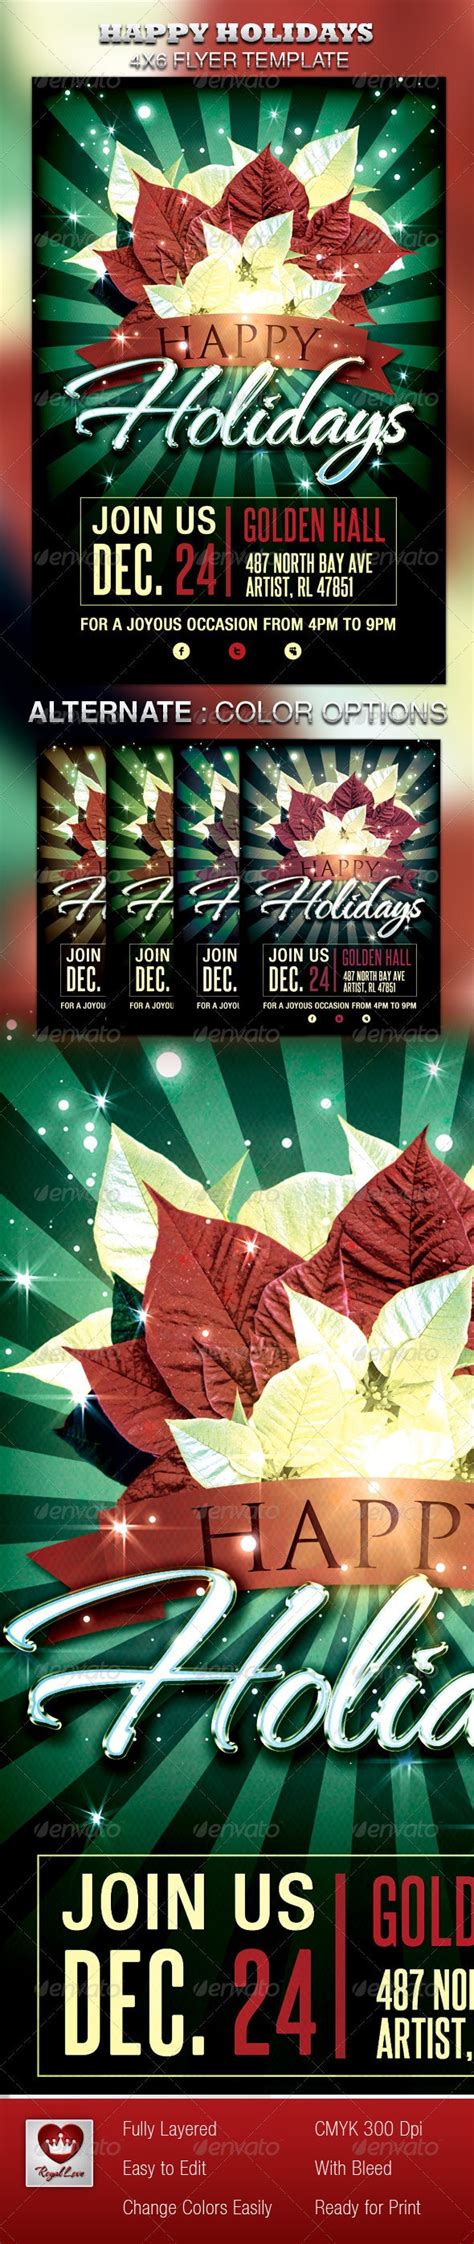 happy holidays flyer print templates graphicriver